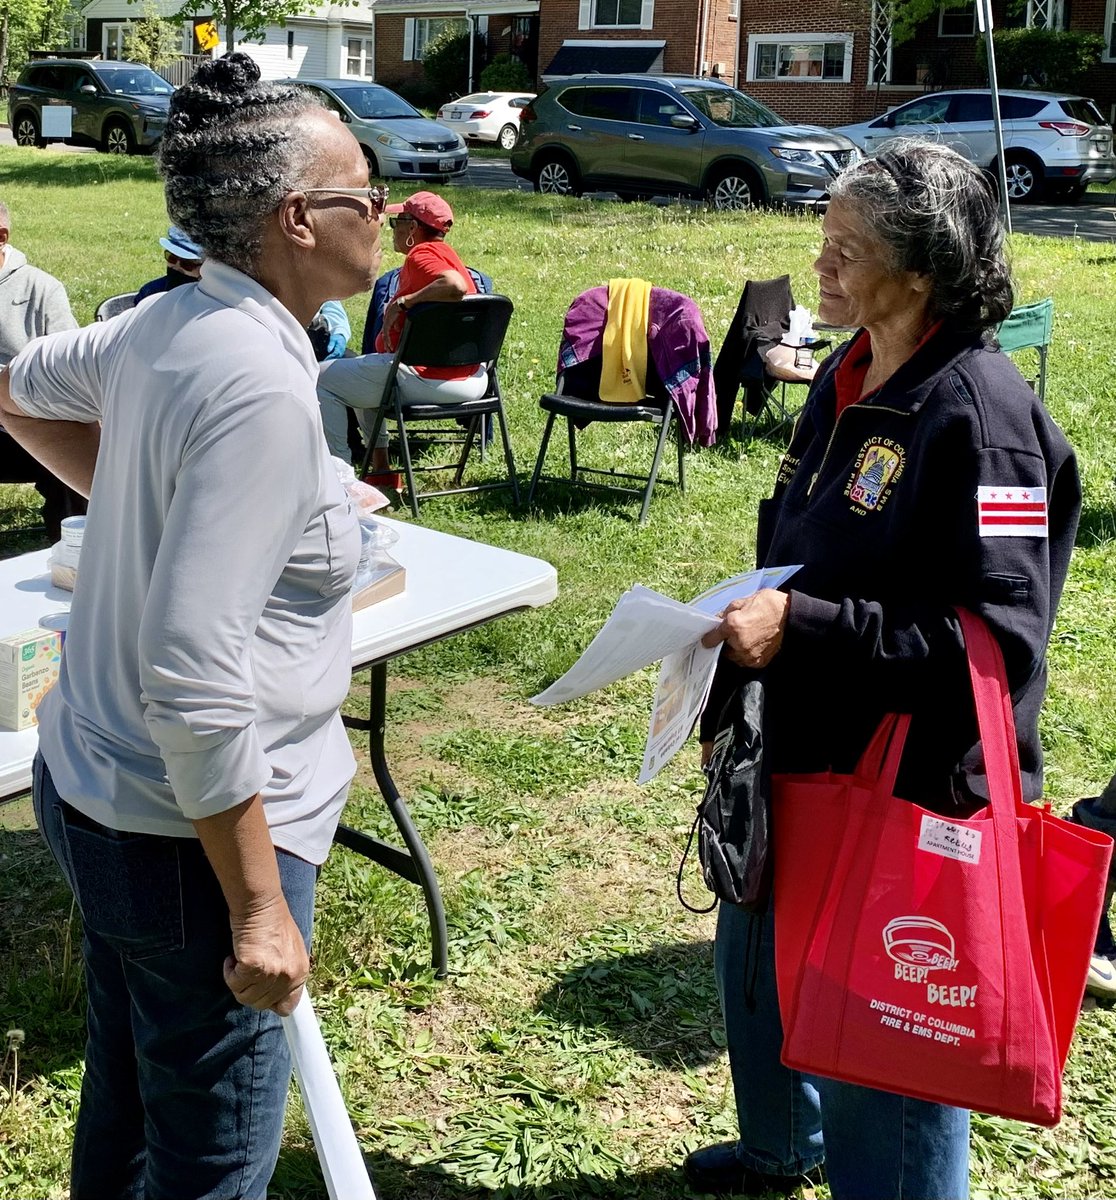 Engine 30 from The Heights firehouse joined in to help with a food distribution at the Peace Lutheran Church on Ames St NE. Fire Safety Education Specialist Patricia Everett was also there providing safety tips. Every day is a community day. #DCsBravest